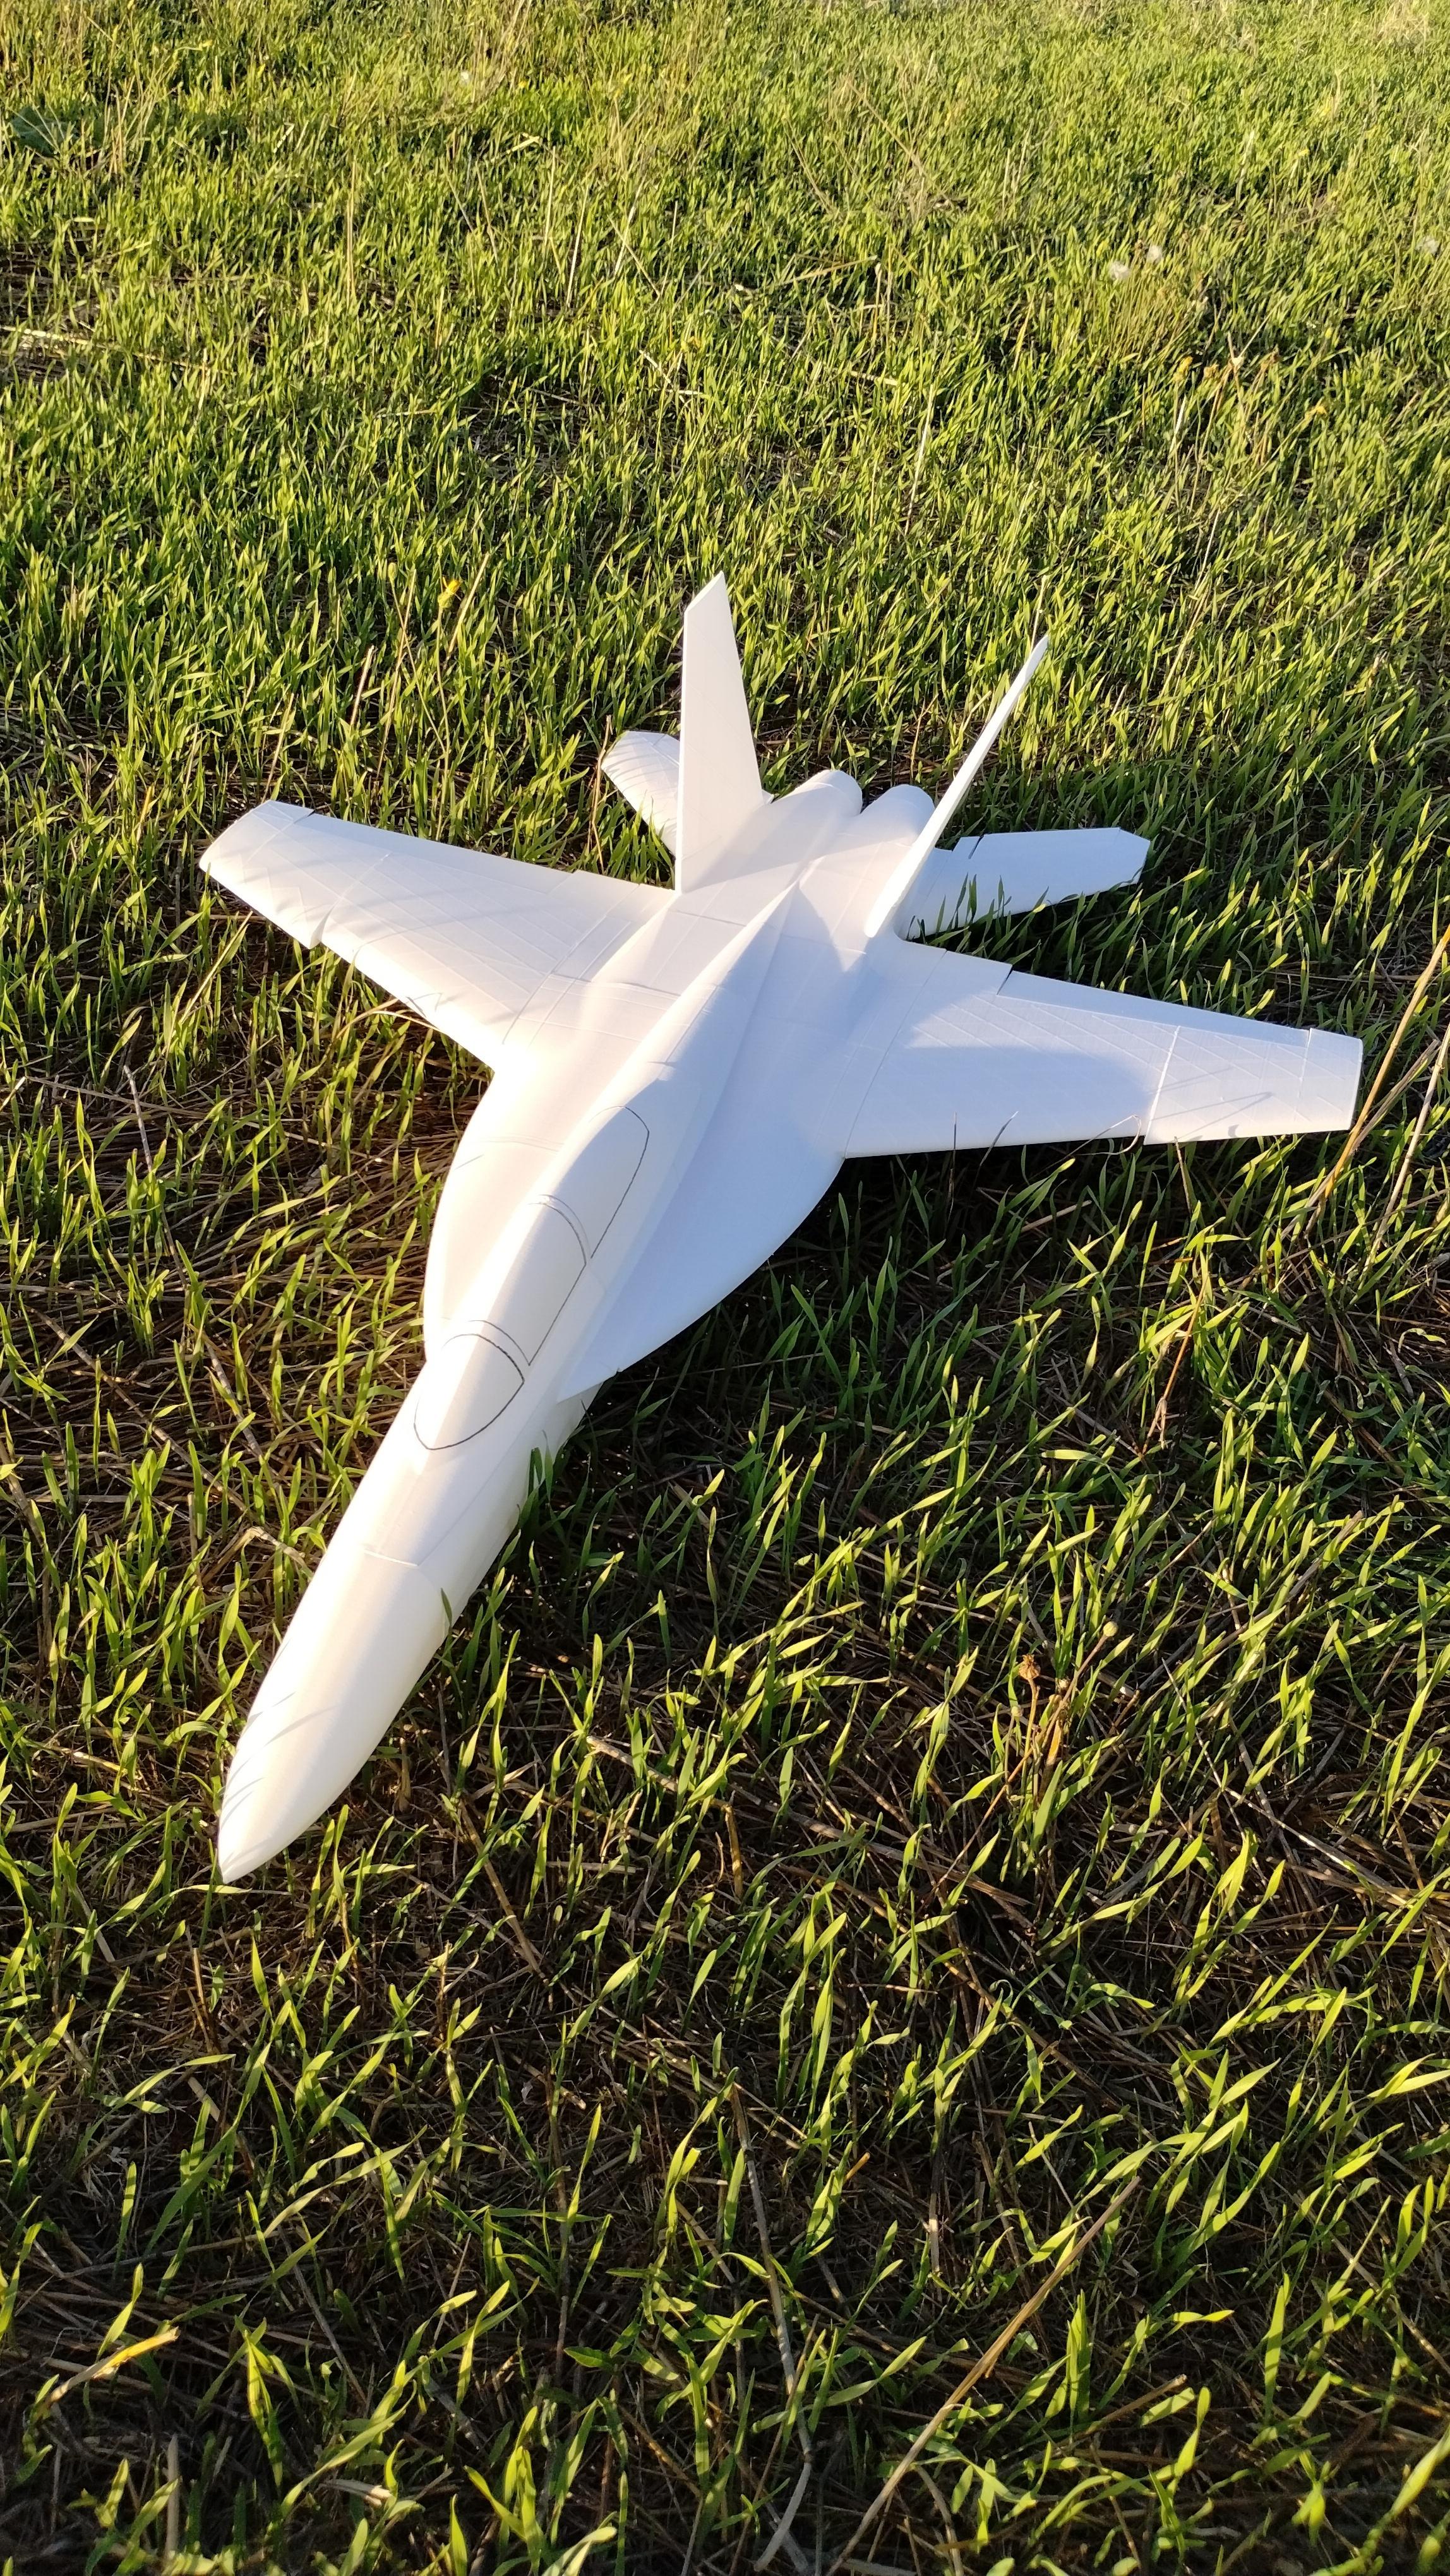 F18 Rc Airplane: Tips and Recommendations for Flying an F18 RC Airplane